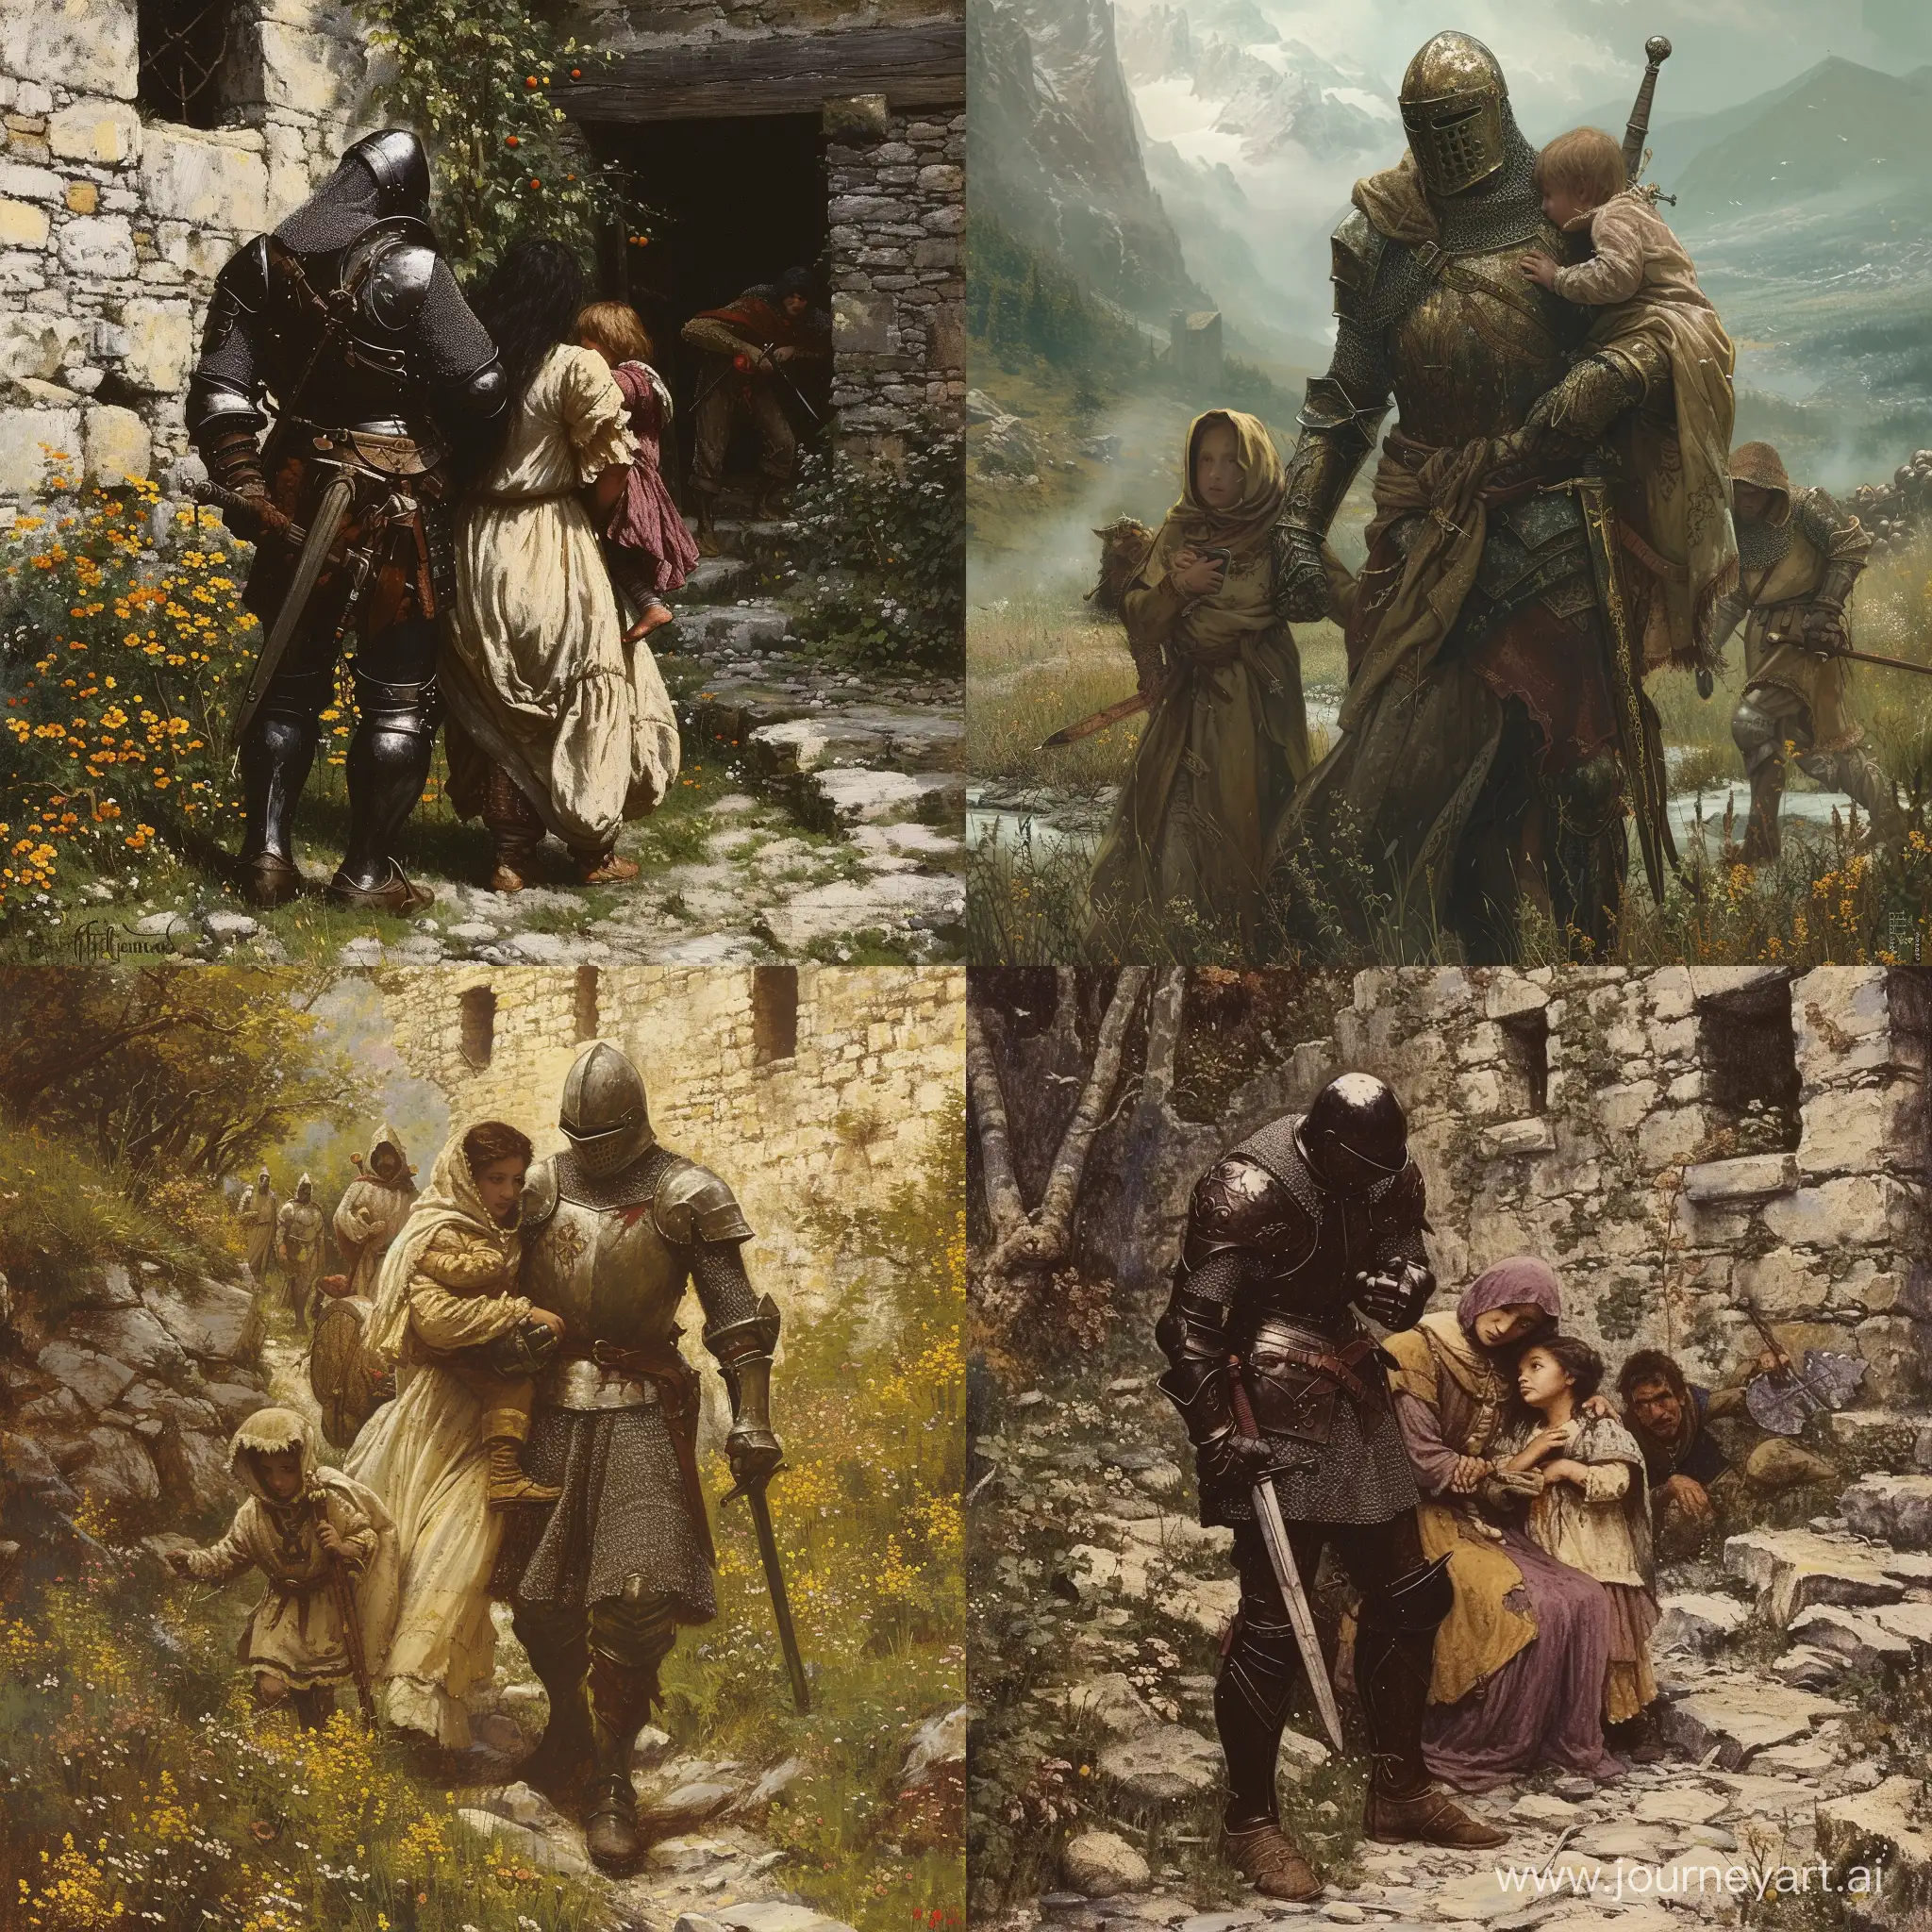 a knight protects a mother and child from outnumbered bandits